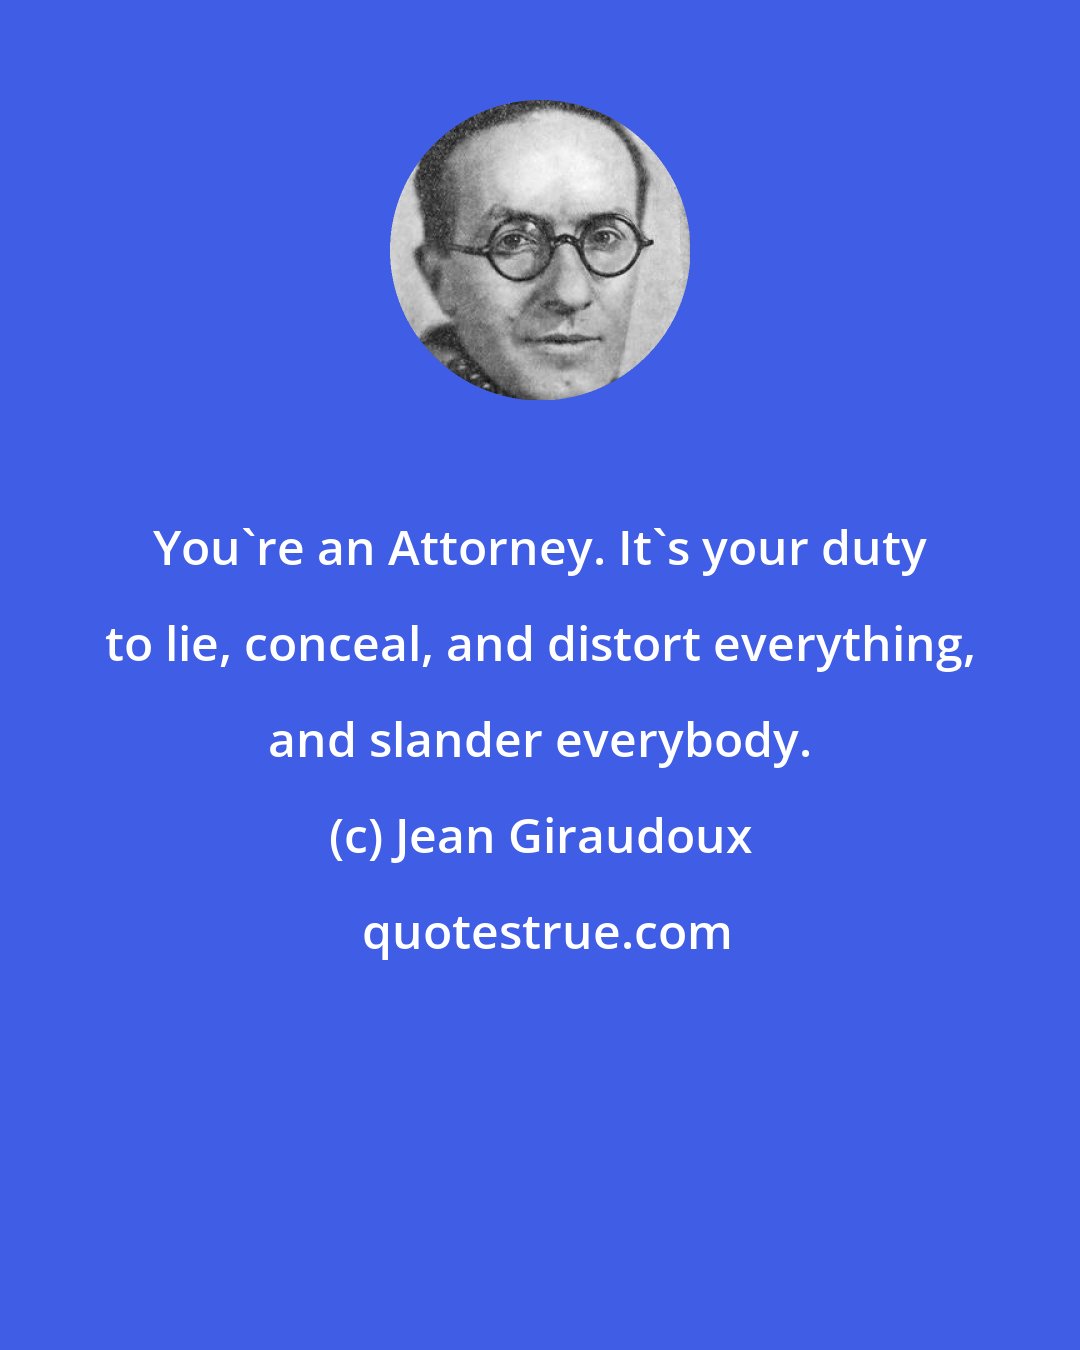 Jean Giraudoux: You're an Attorney. It's your duty to lie, conceal, and distort everything, and slander everybody.